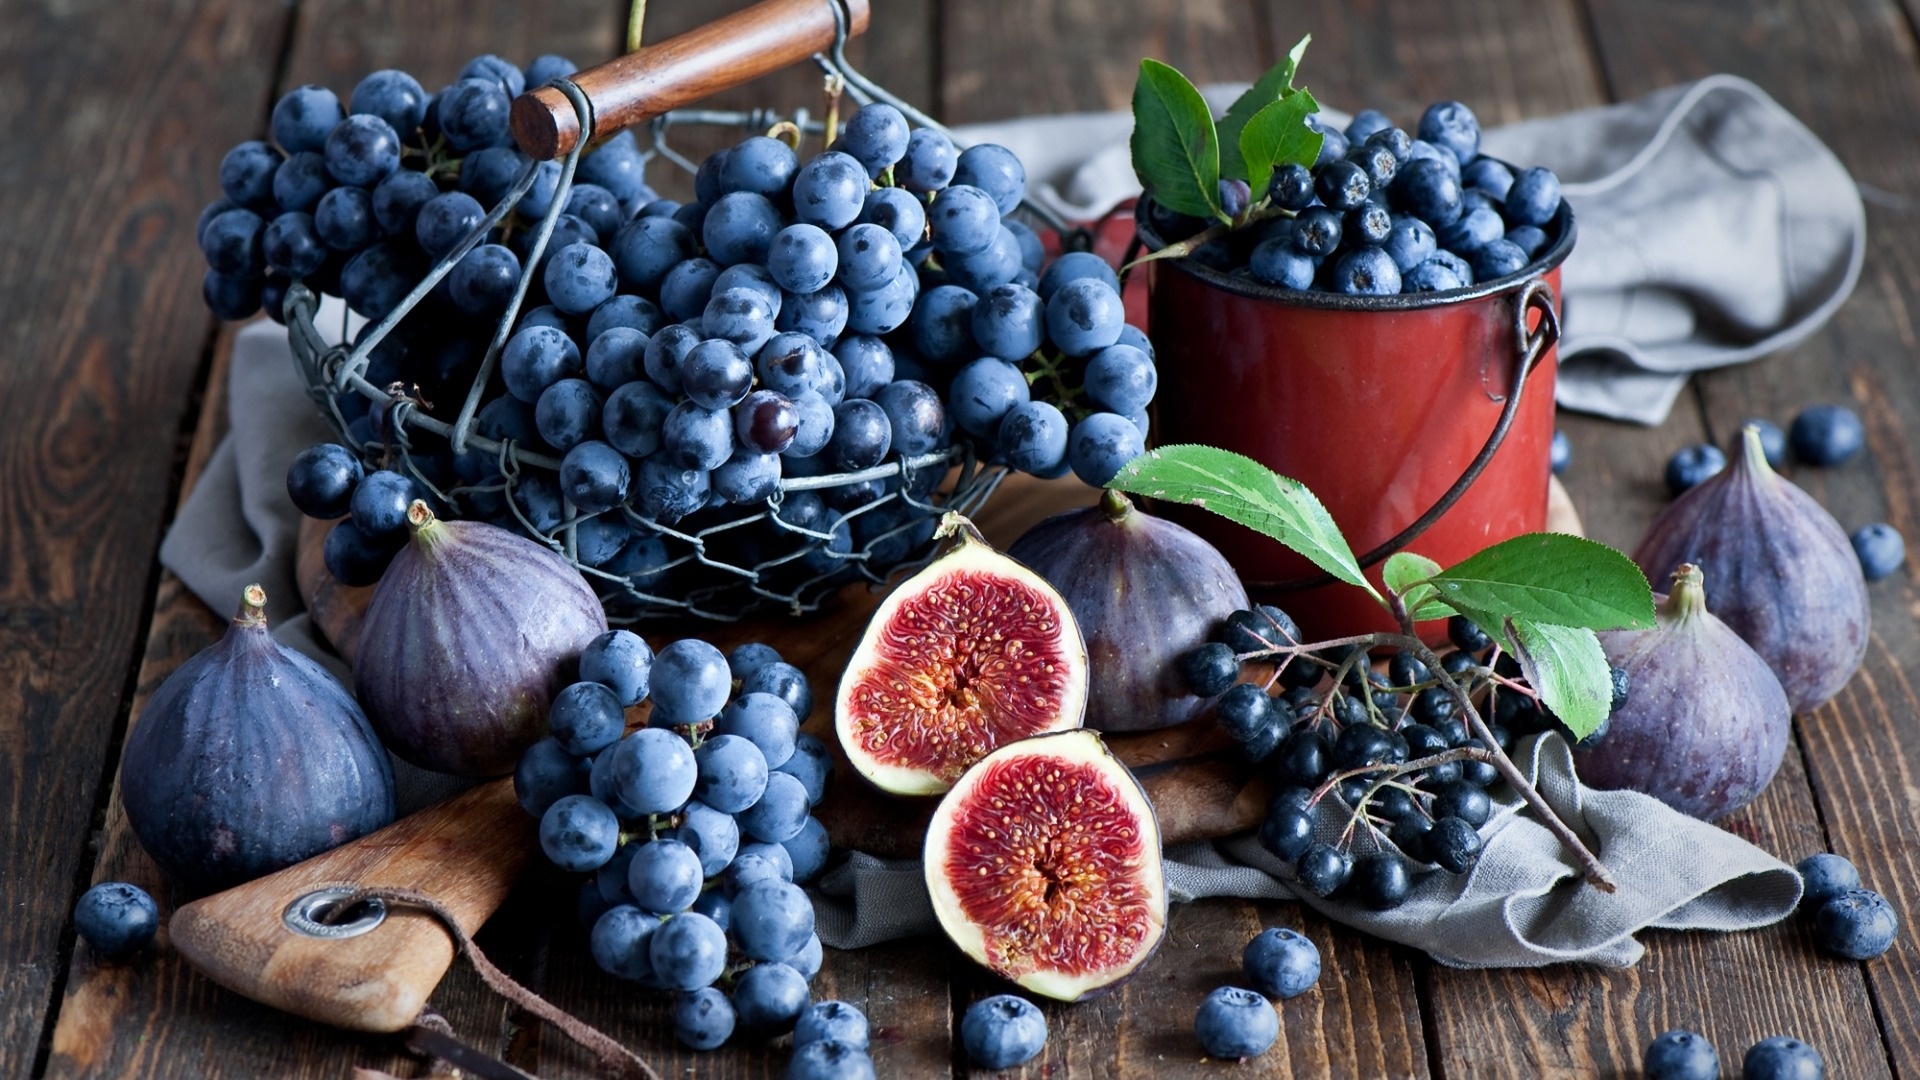 Fig: Figs, Grapes, Blueberries, Whole food. 1920x1080 Full HD Wallpaper.